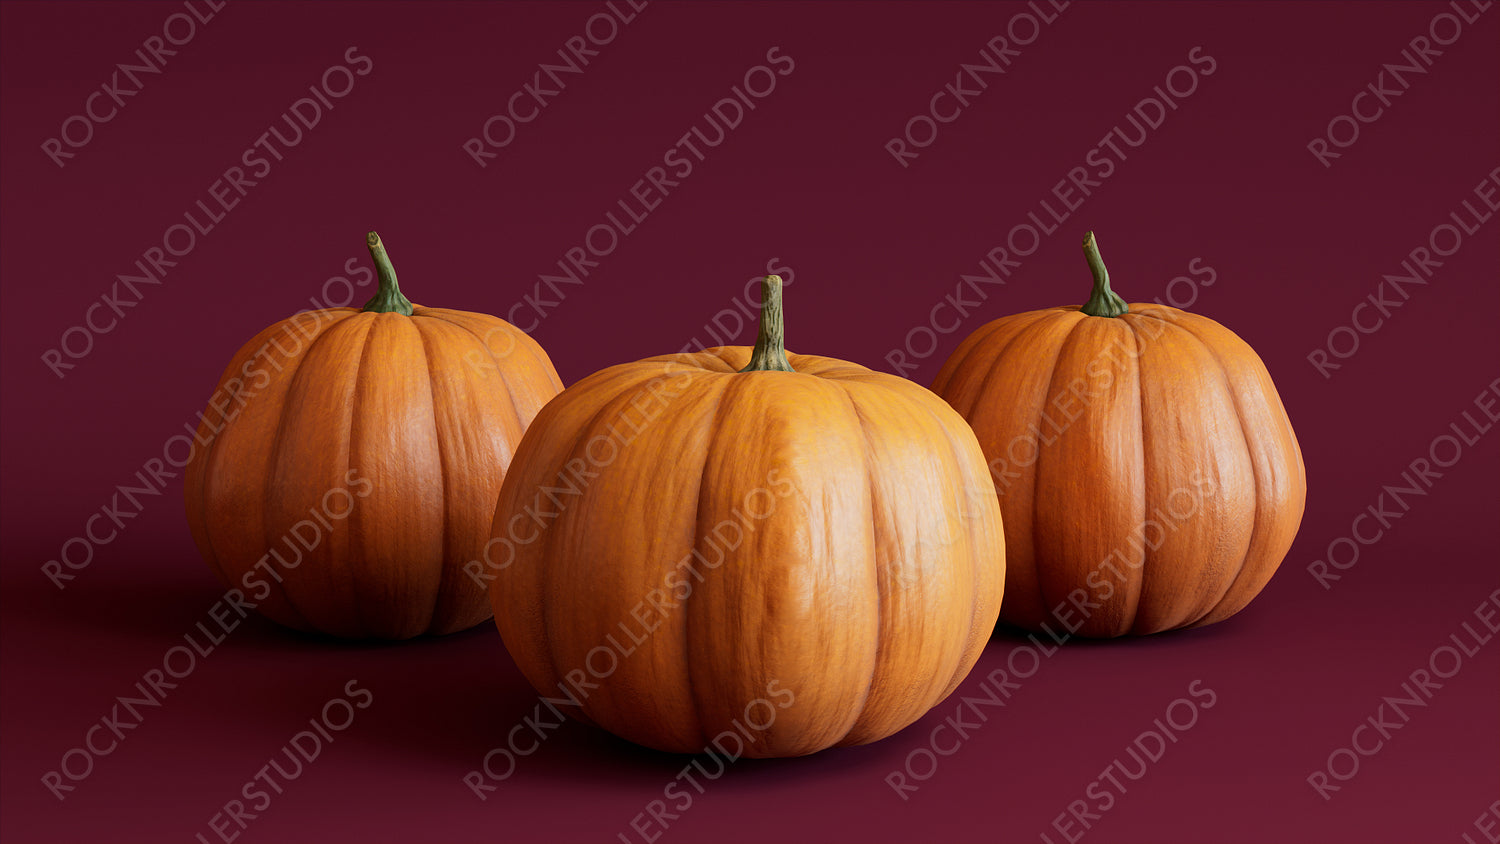 Contemporary Fall Image with a collection of Pumpkins on Burgundy background.